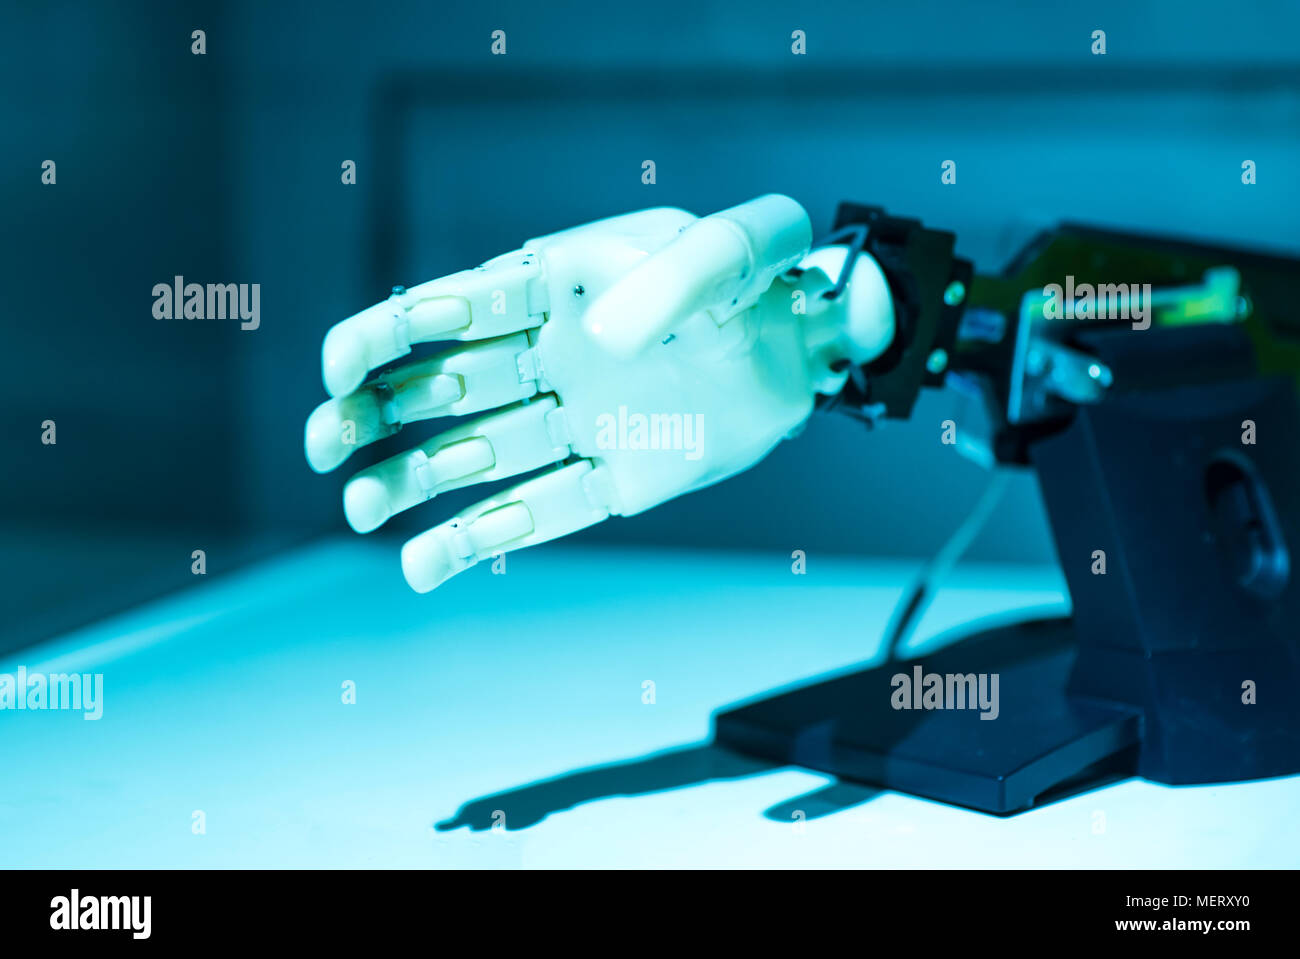 Augmented reality for industry concept. Robotic and Automation system control application on automate robot arm in smart manufacturing background. Stock Photo